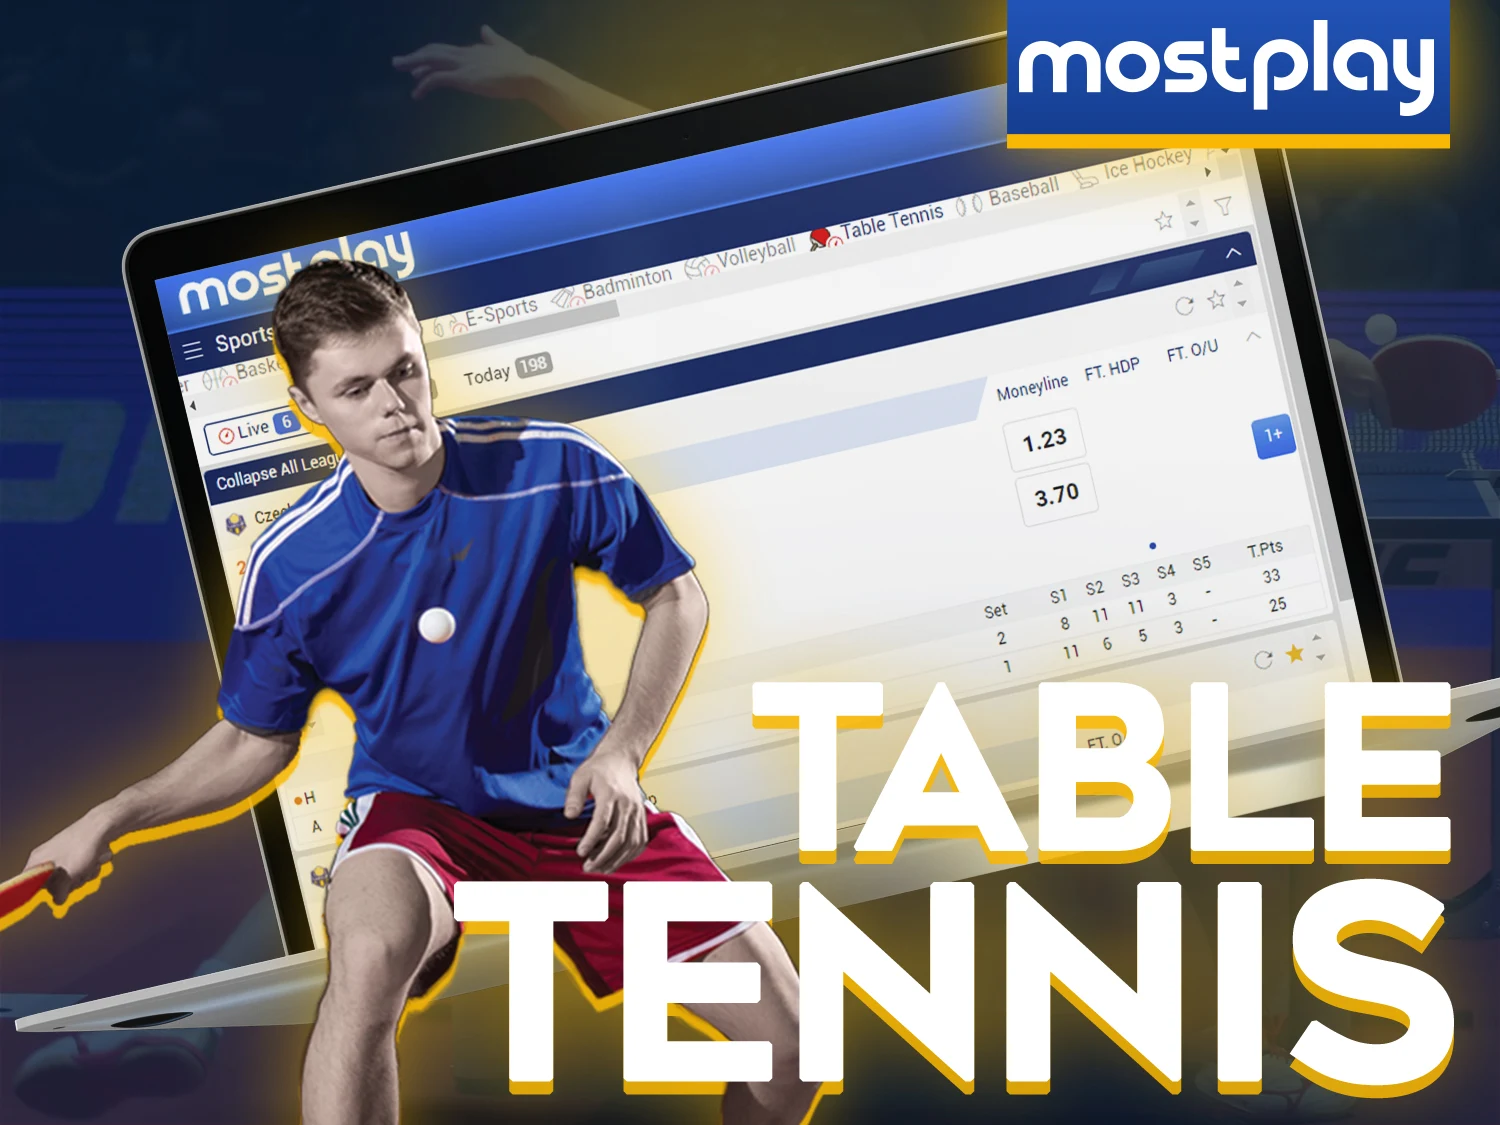 Bet on your favorite table tennis players on the Mostplay sports page.